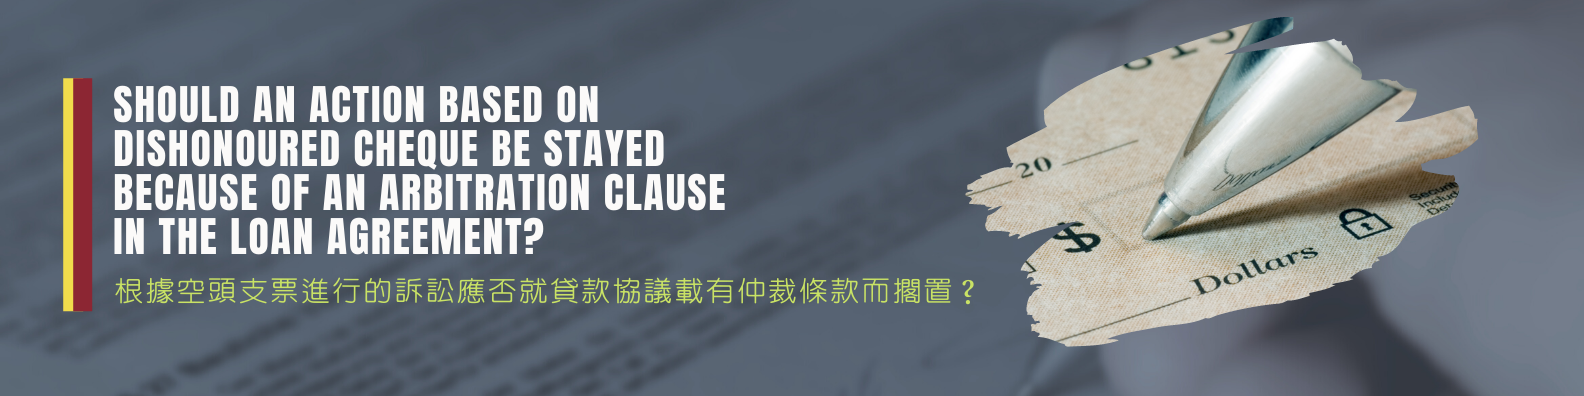 Should an action based on dishonoured cheque be stayed  because of an arbitration clause in the loan agreement?